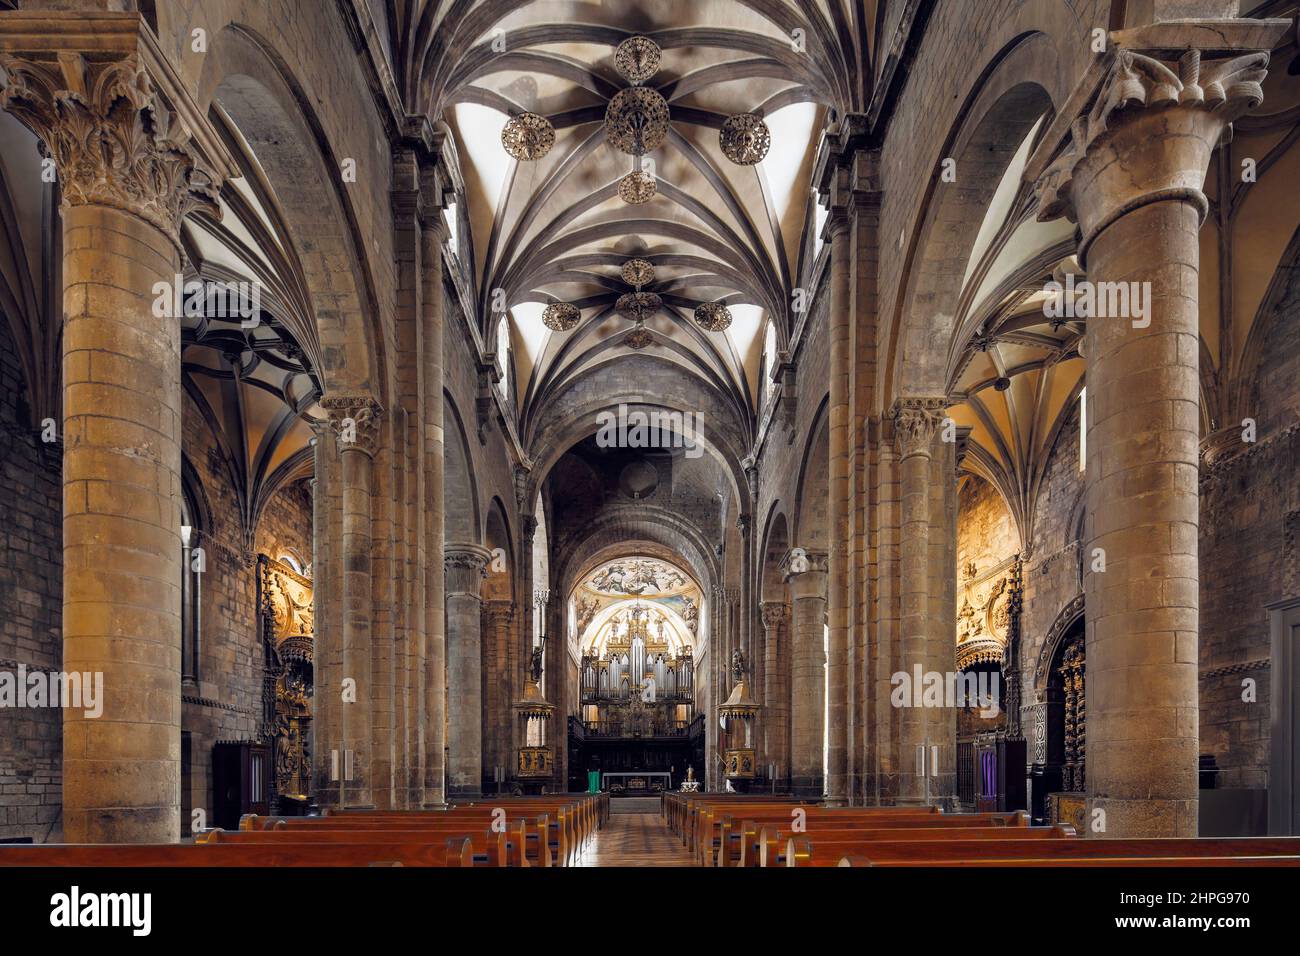 Jaca, Huesca Province, Aragon, Spain.   Nave of the Romanesque Catedral de San Pedro Apóstol.  Cathedral of St Peter the Apostle.  The building which Stock Photo